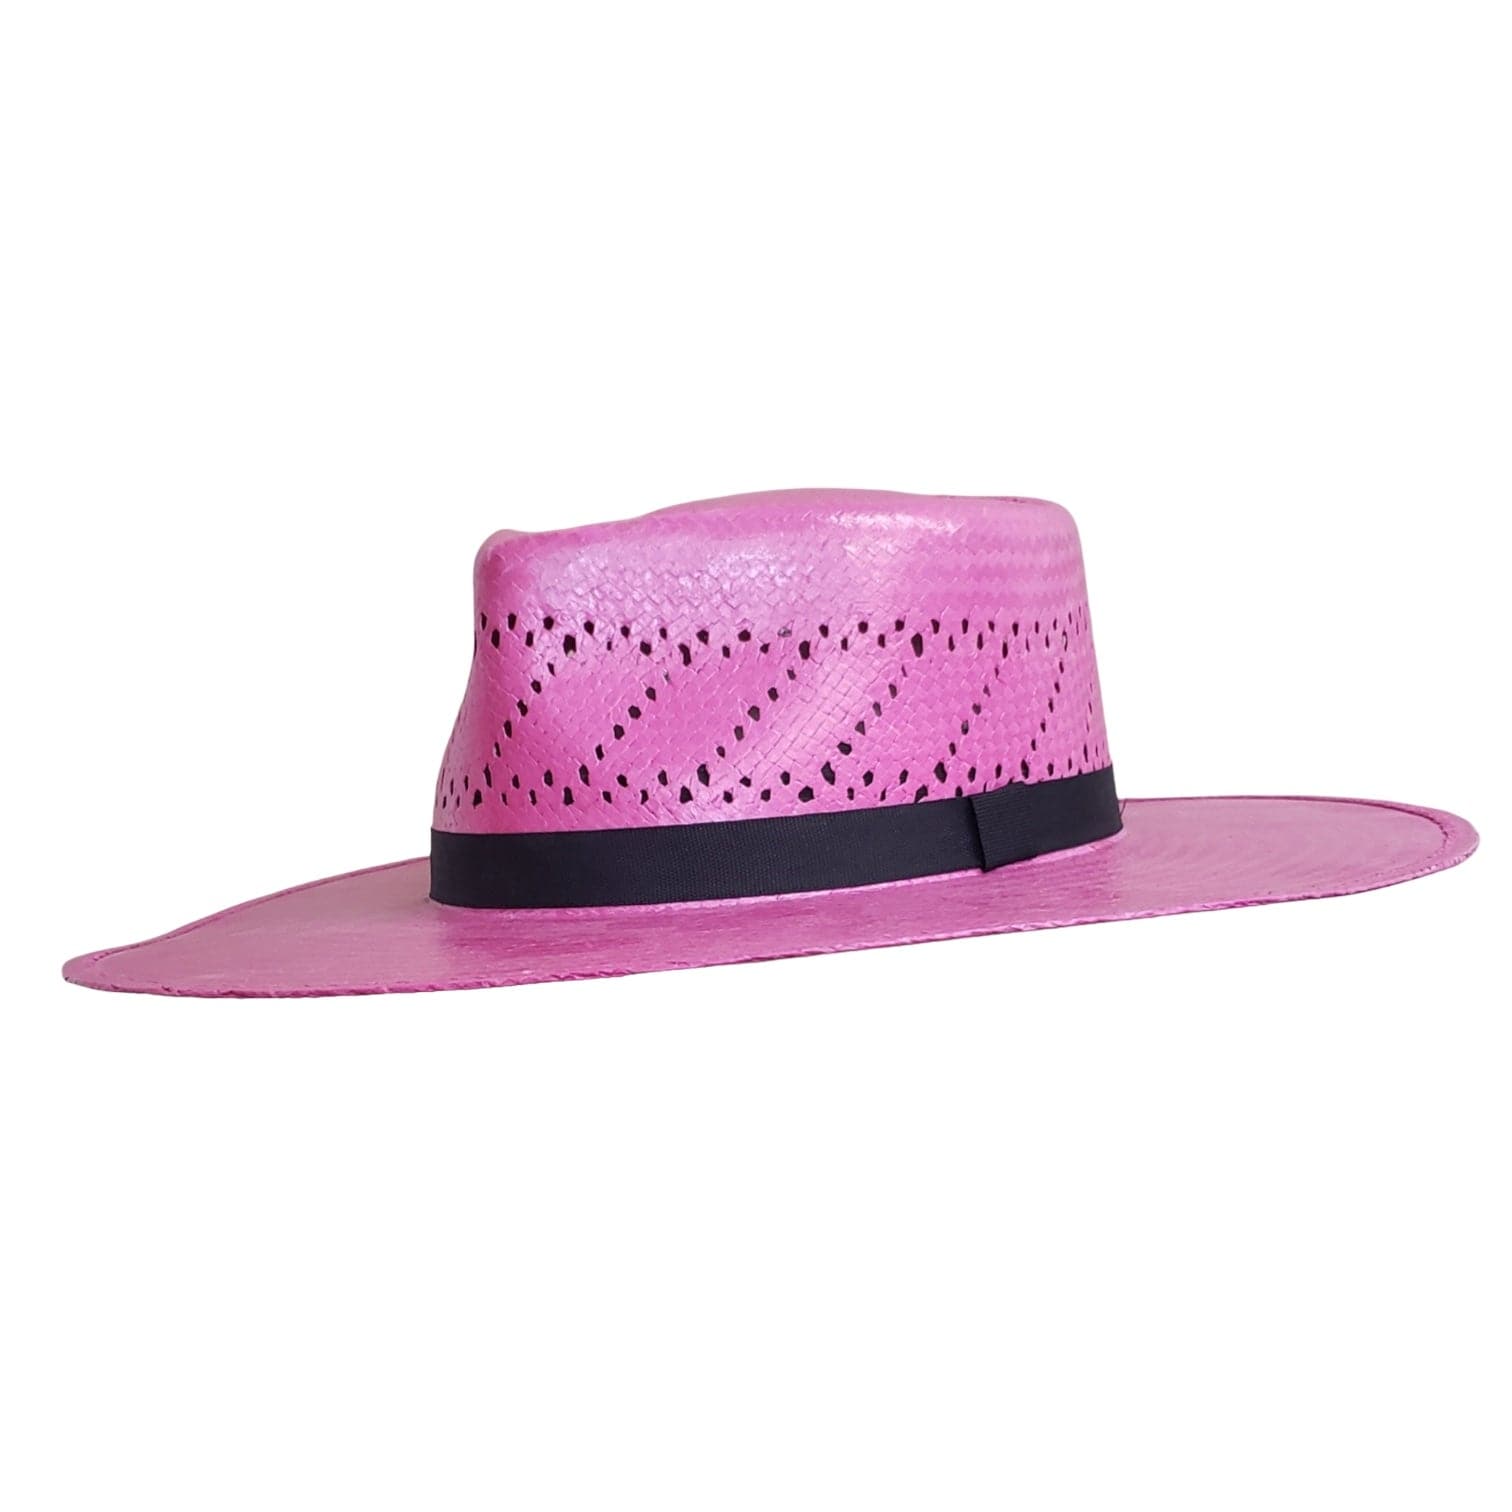 Gone Country Hats Women's Hats Medium  fits 7-1/8 to 7-1/4 Lolita Fuchsia - Straw Shangtung